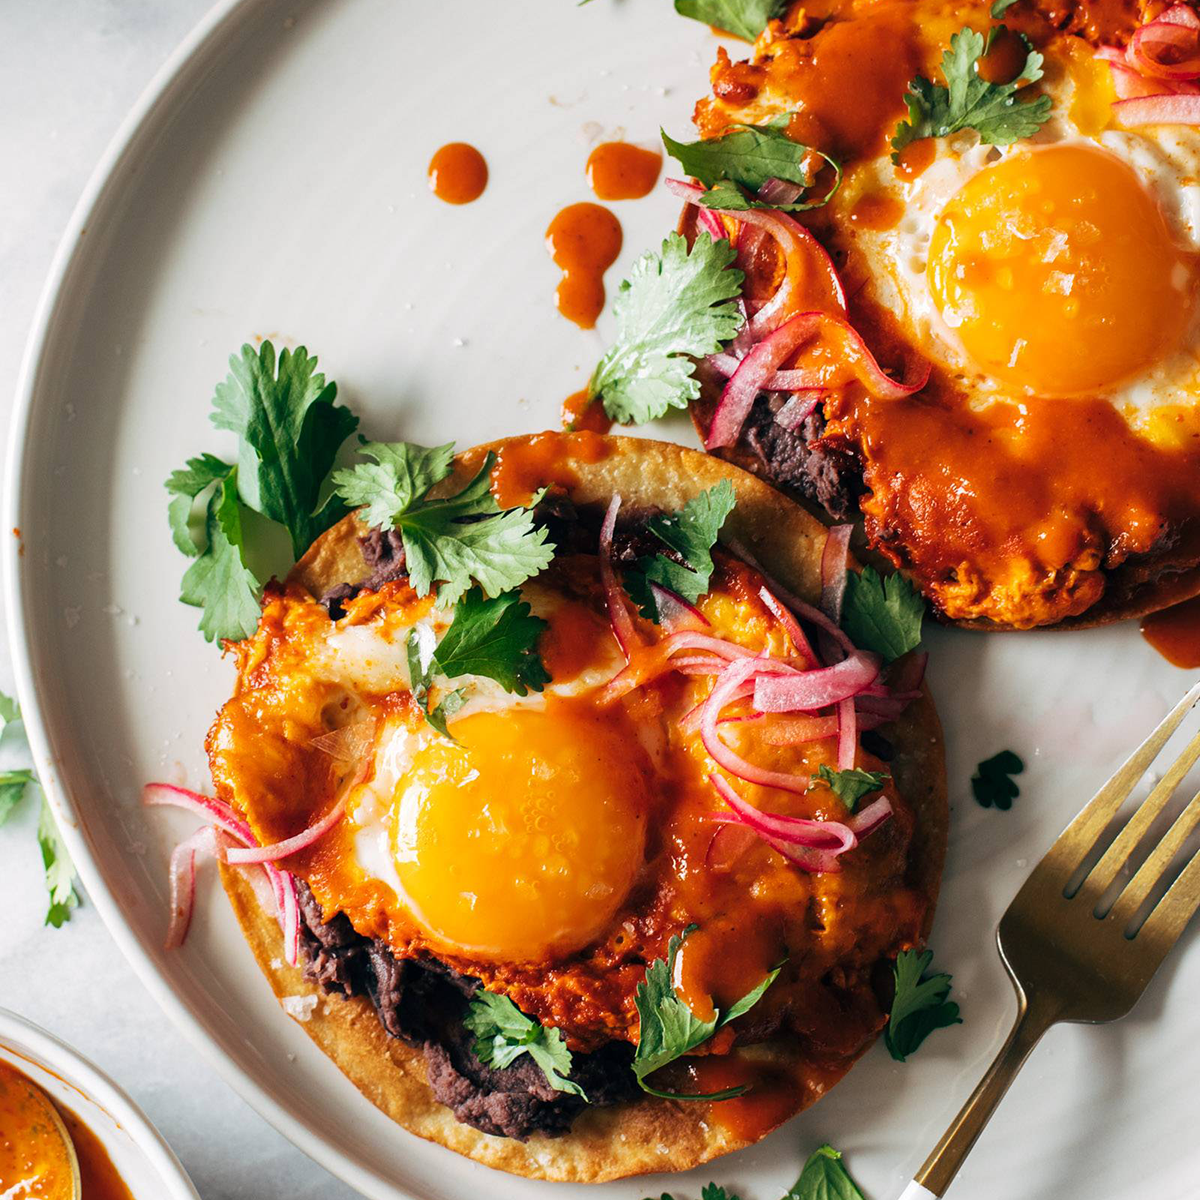 https://pinchofyum.com/wp-content/uploads/Red-Chile-Tostadas-with-Eggs-Square.png